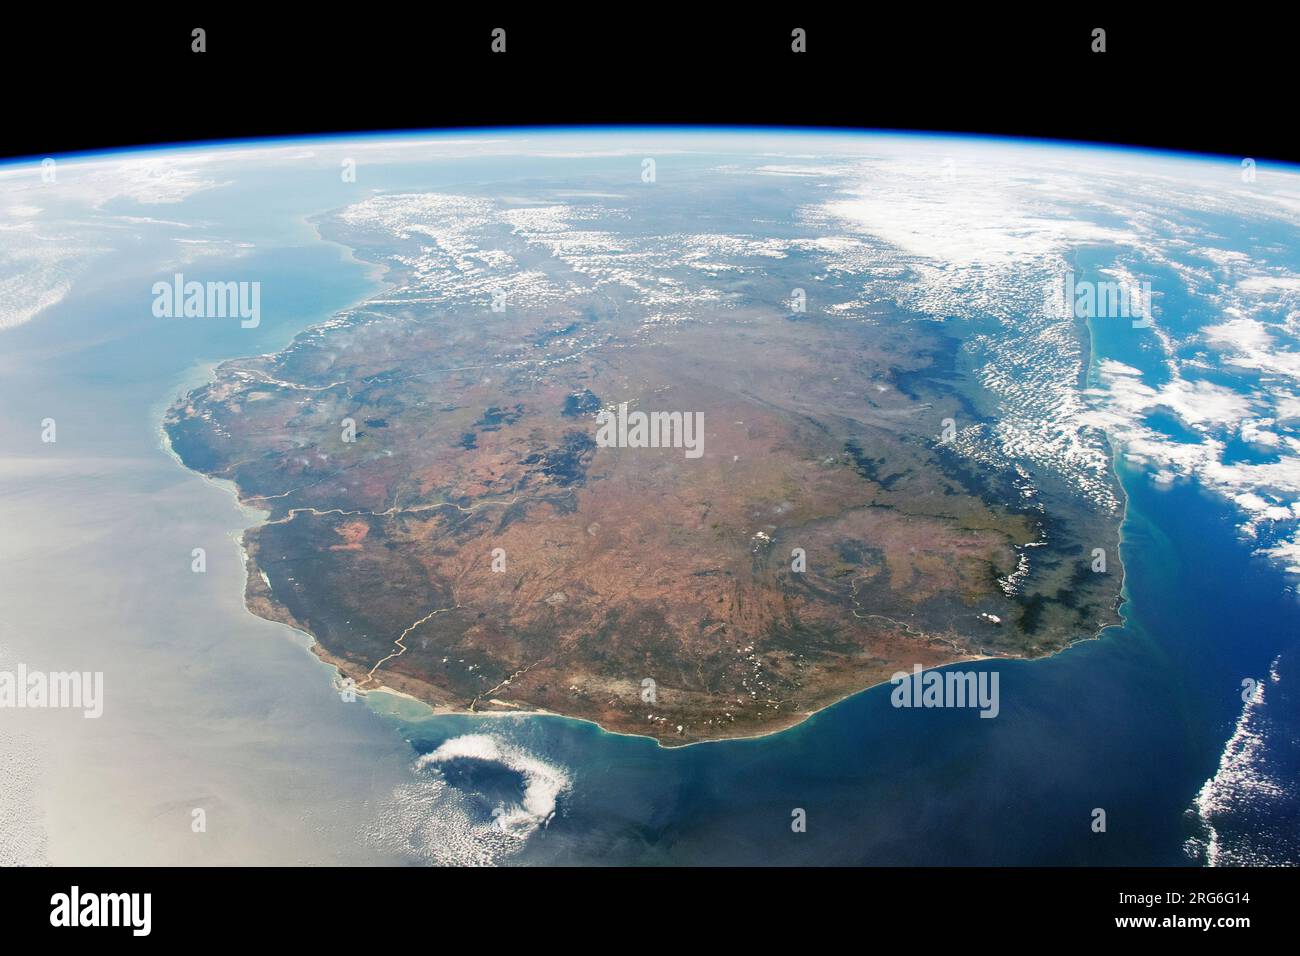 View from space of the island of Madagascar. Stock Photo